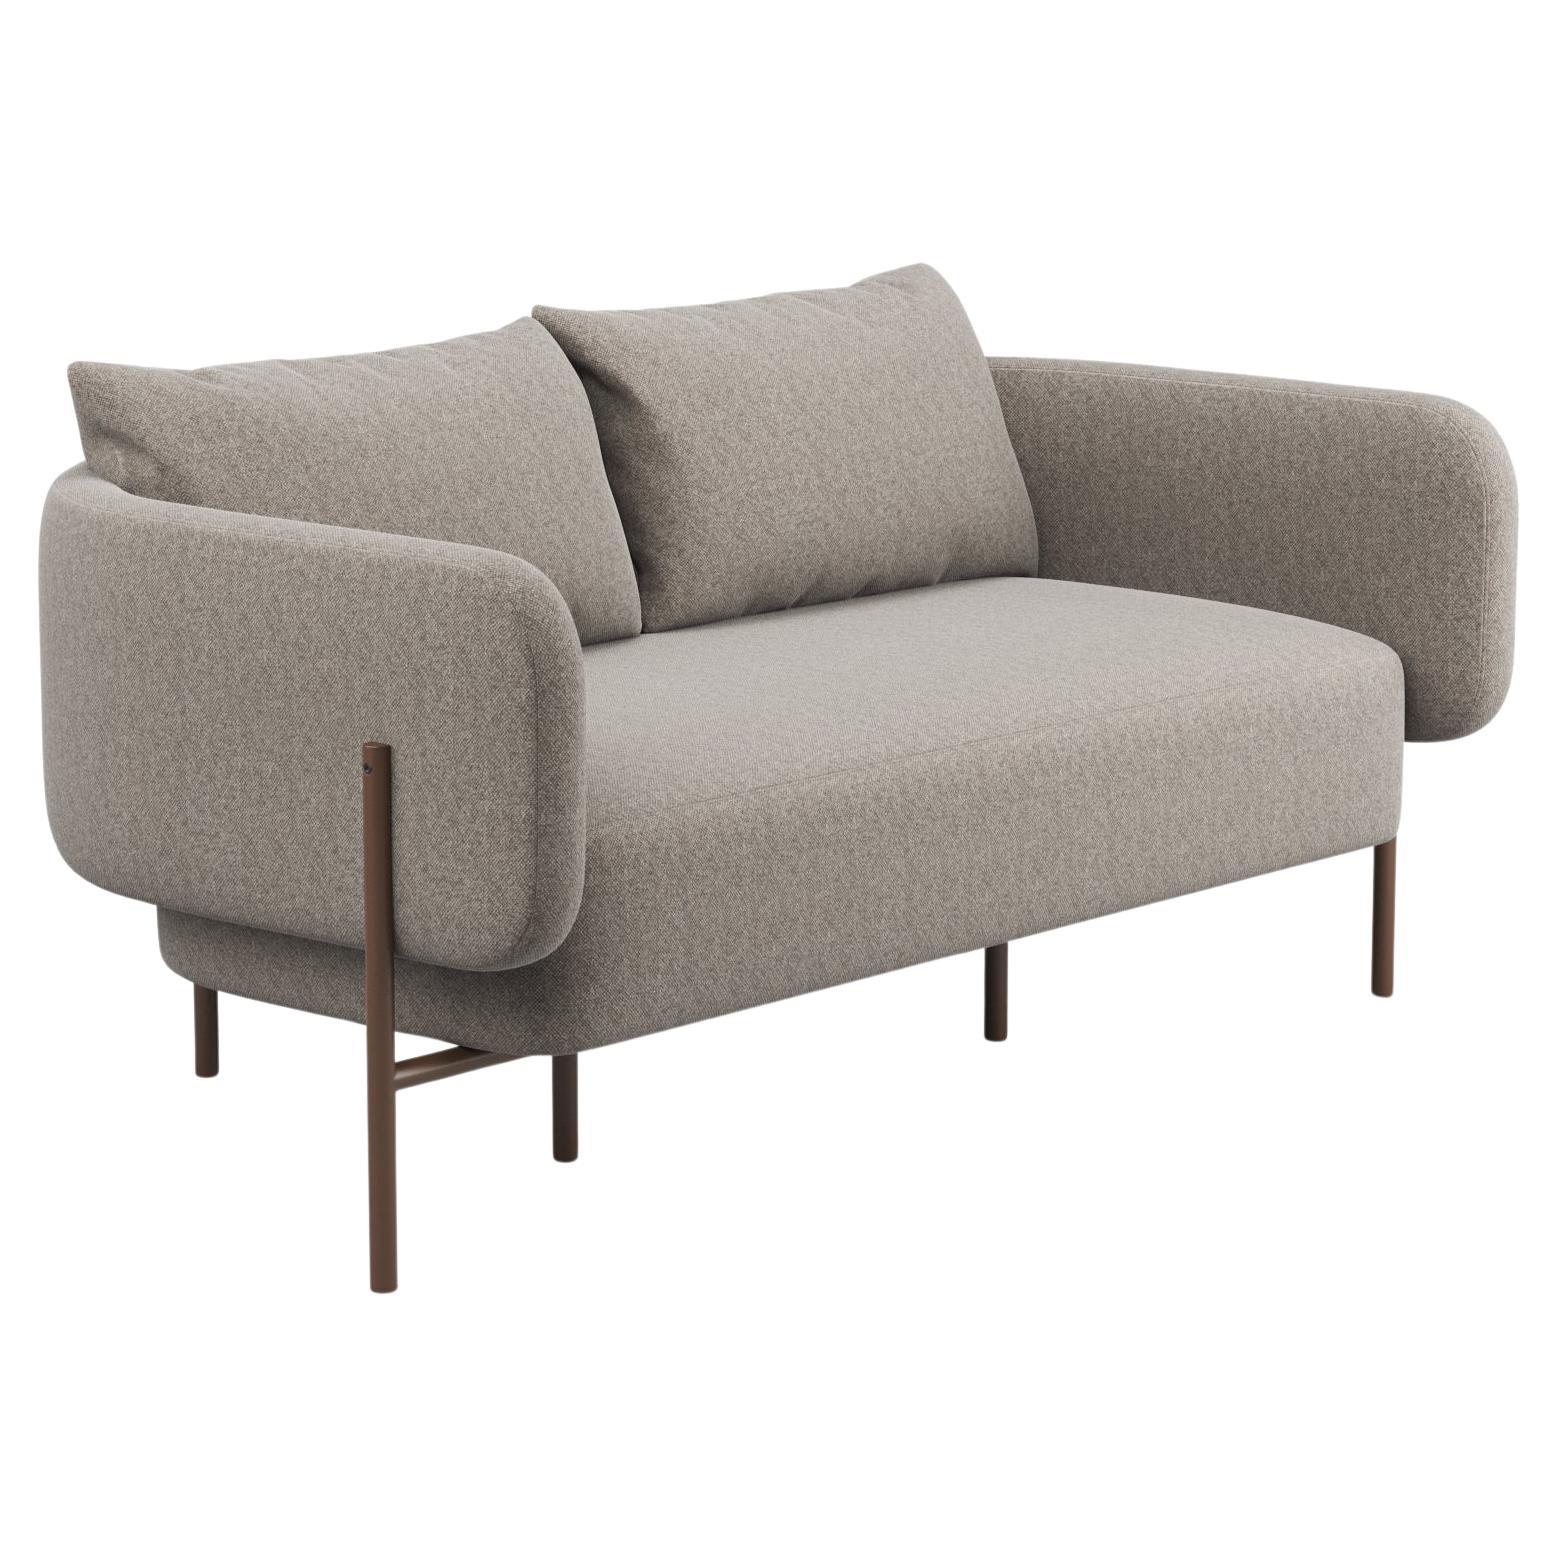 Hayche Abrazo 2 Seater Sofa - Brown, UK, Made to Order